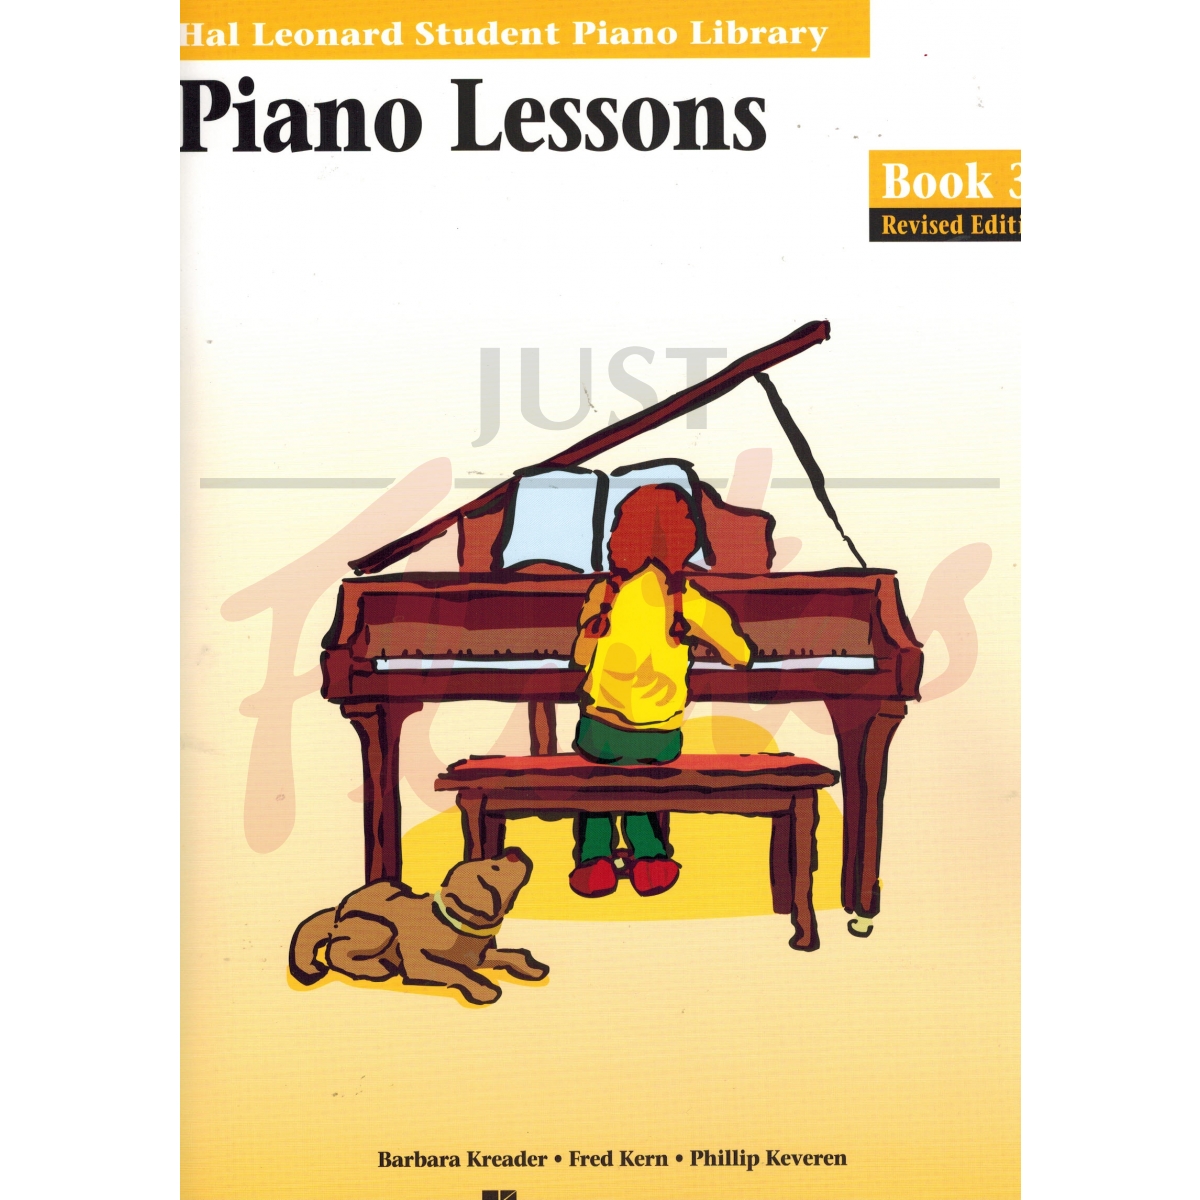 Student Piano Library: Piano Lessons Book 3